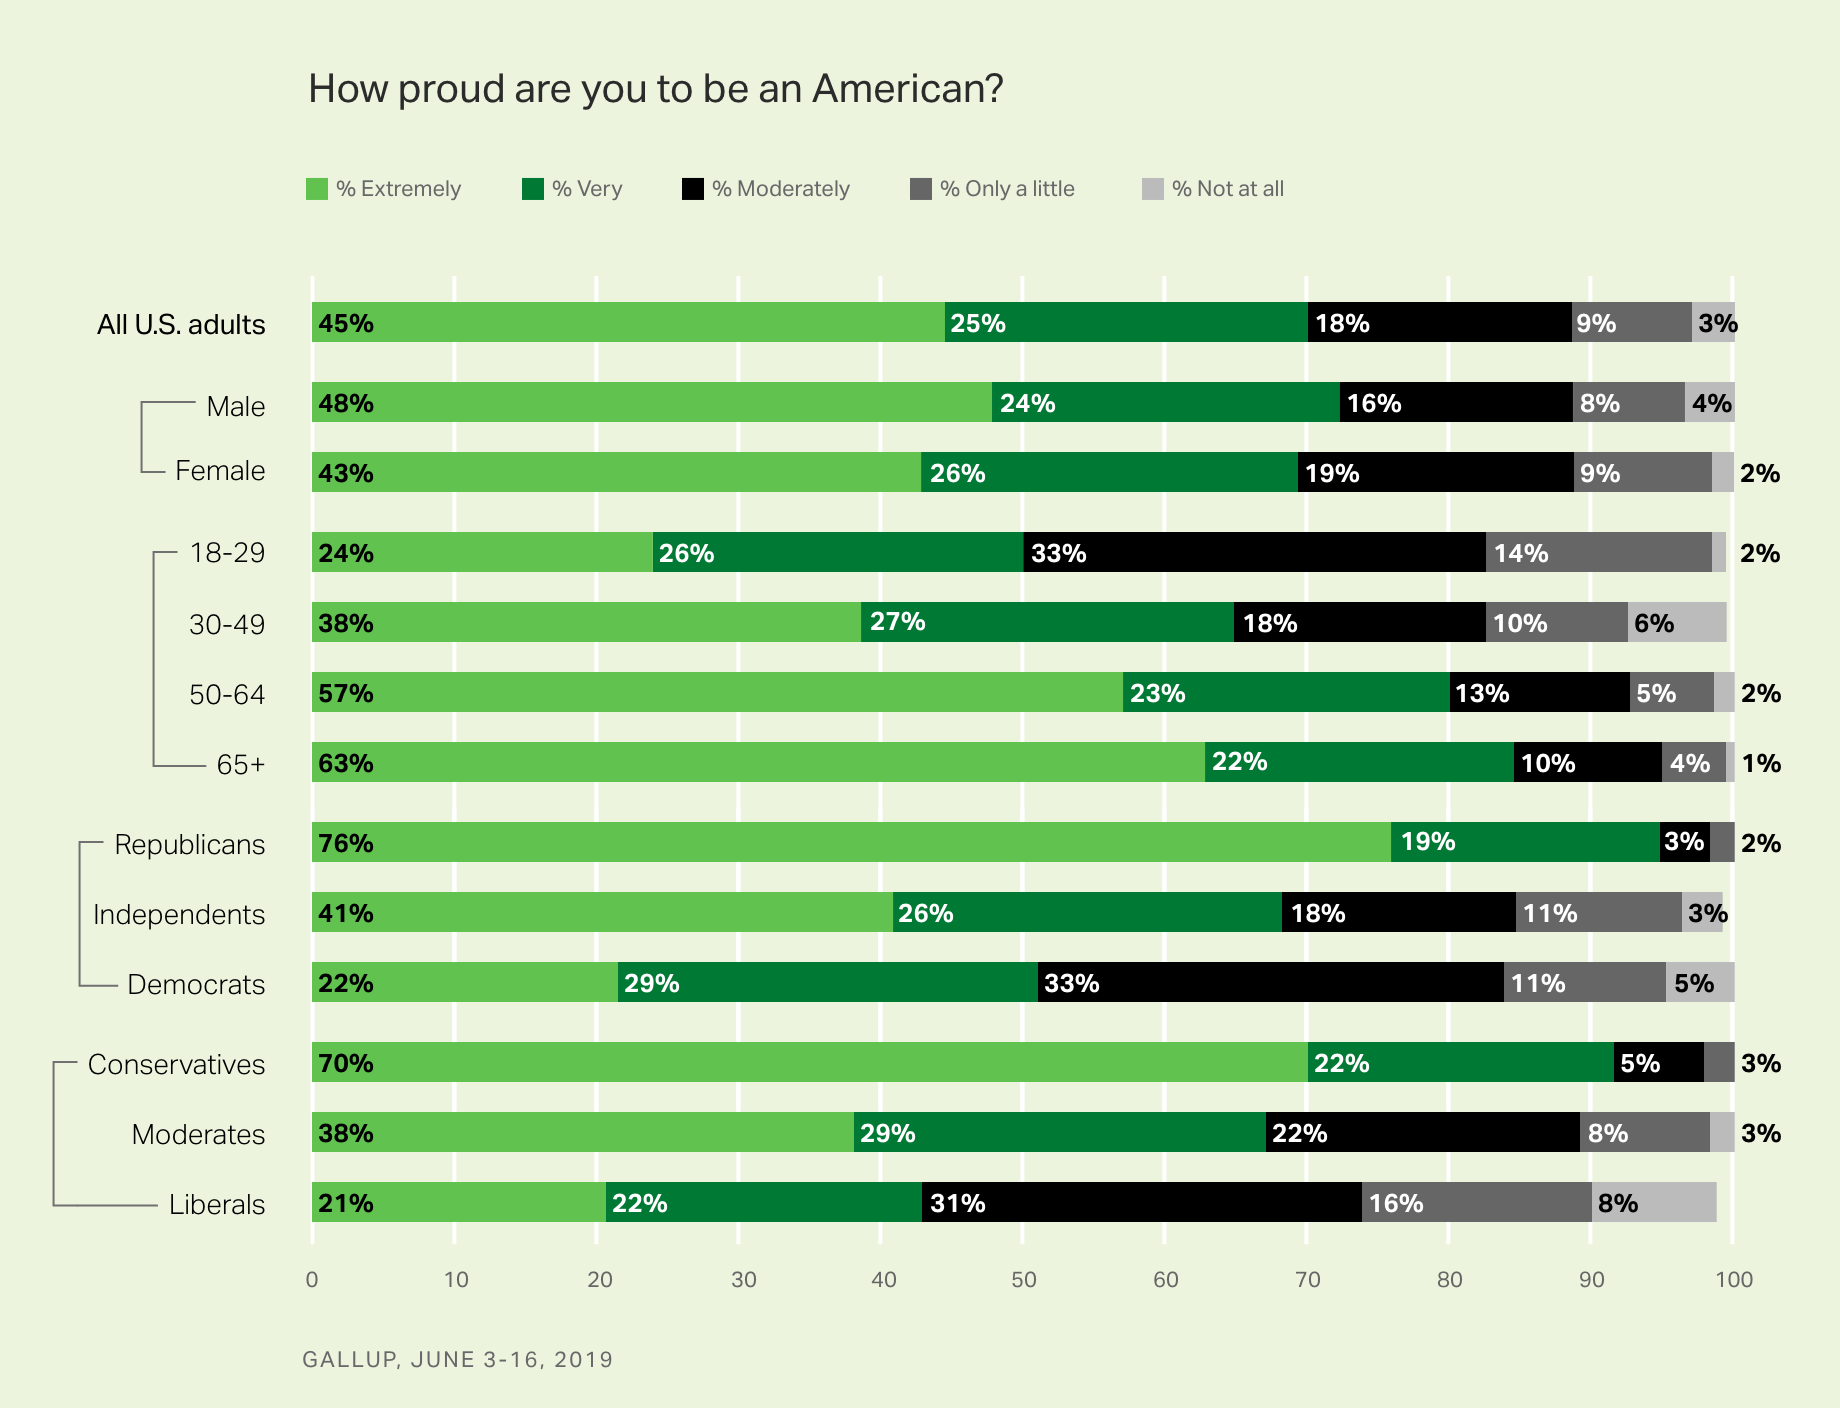  Bar chart. Pride in being an American among major subgroups.